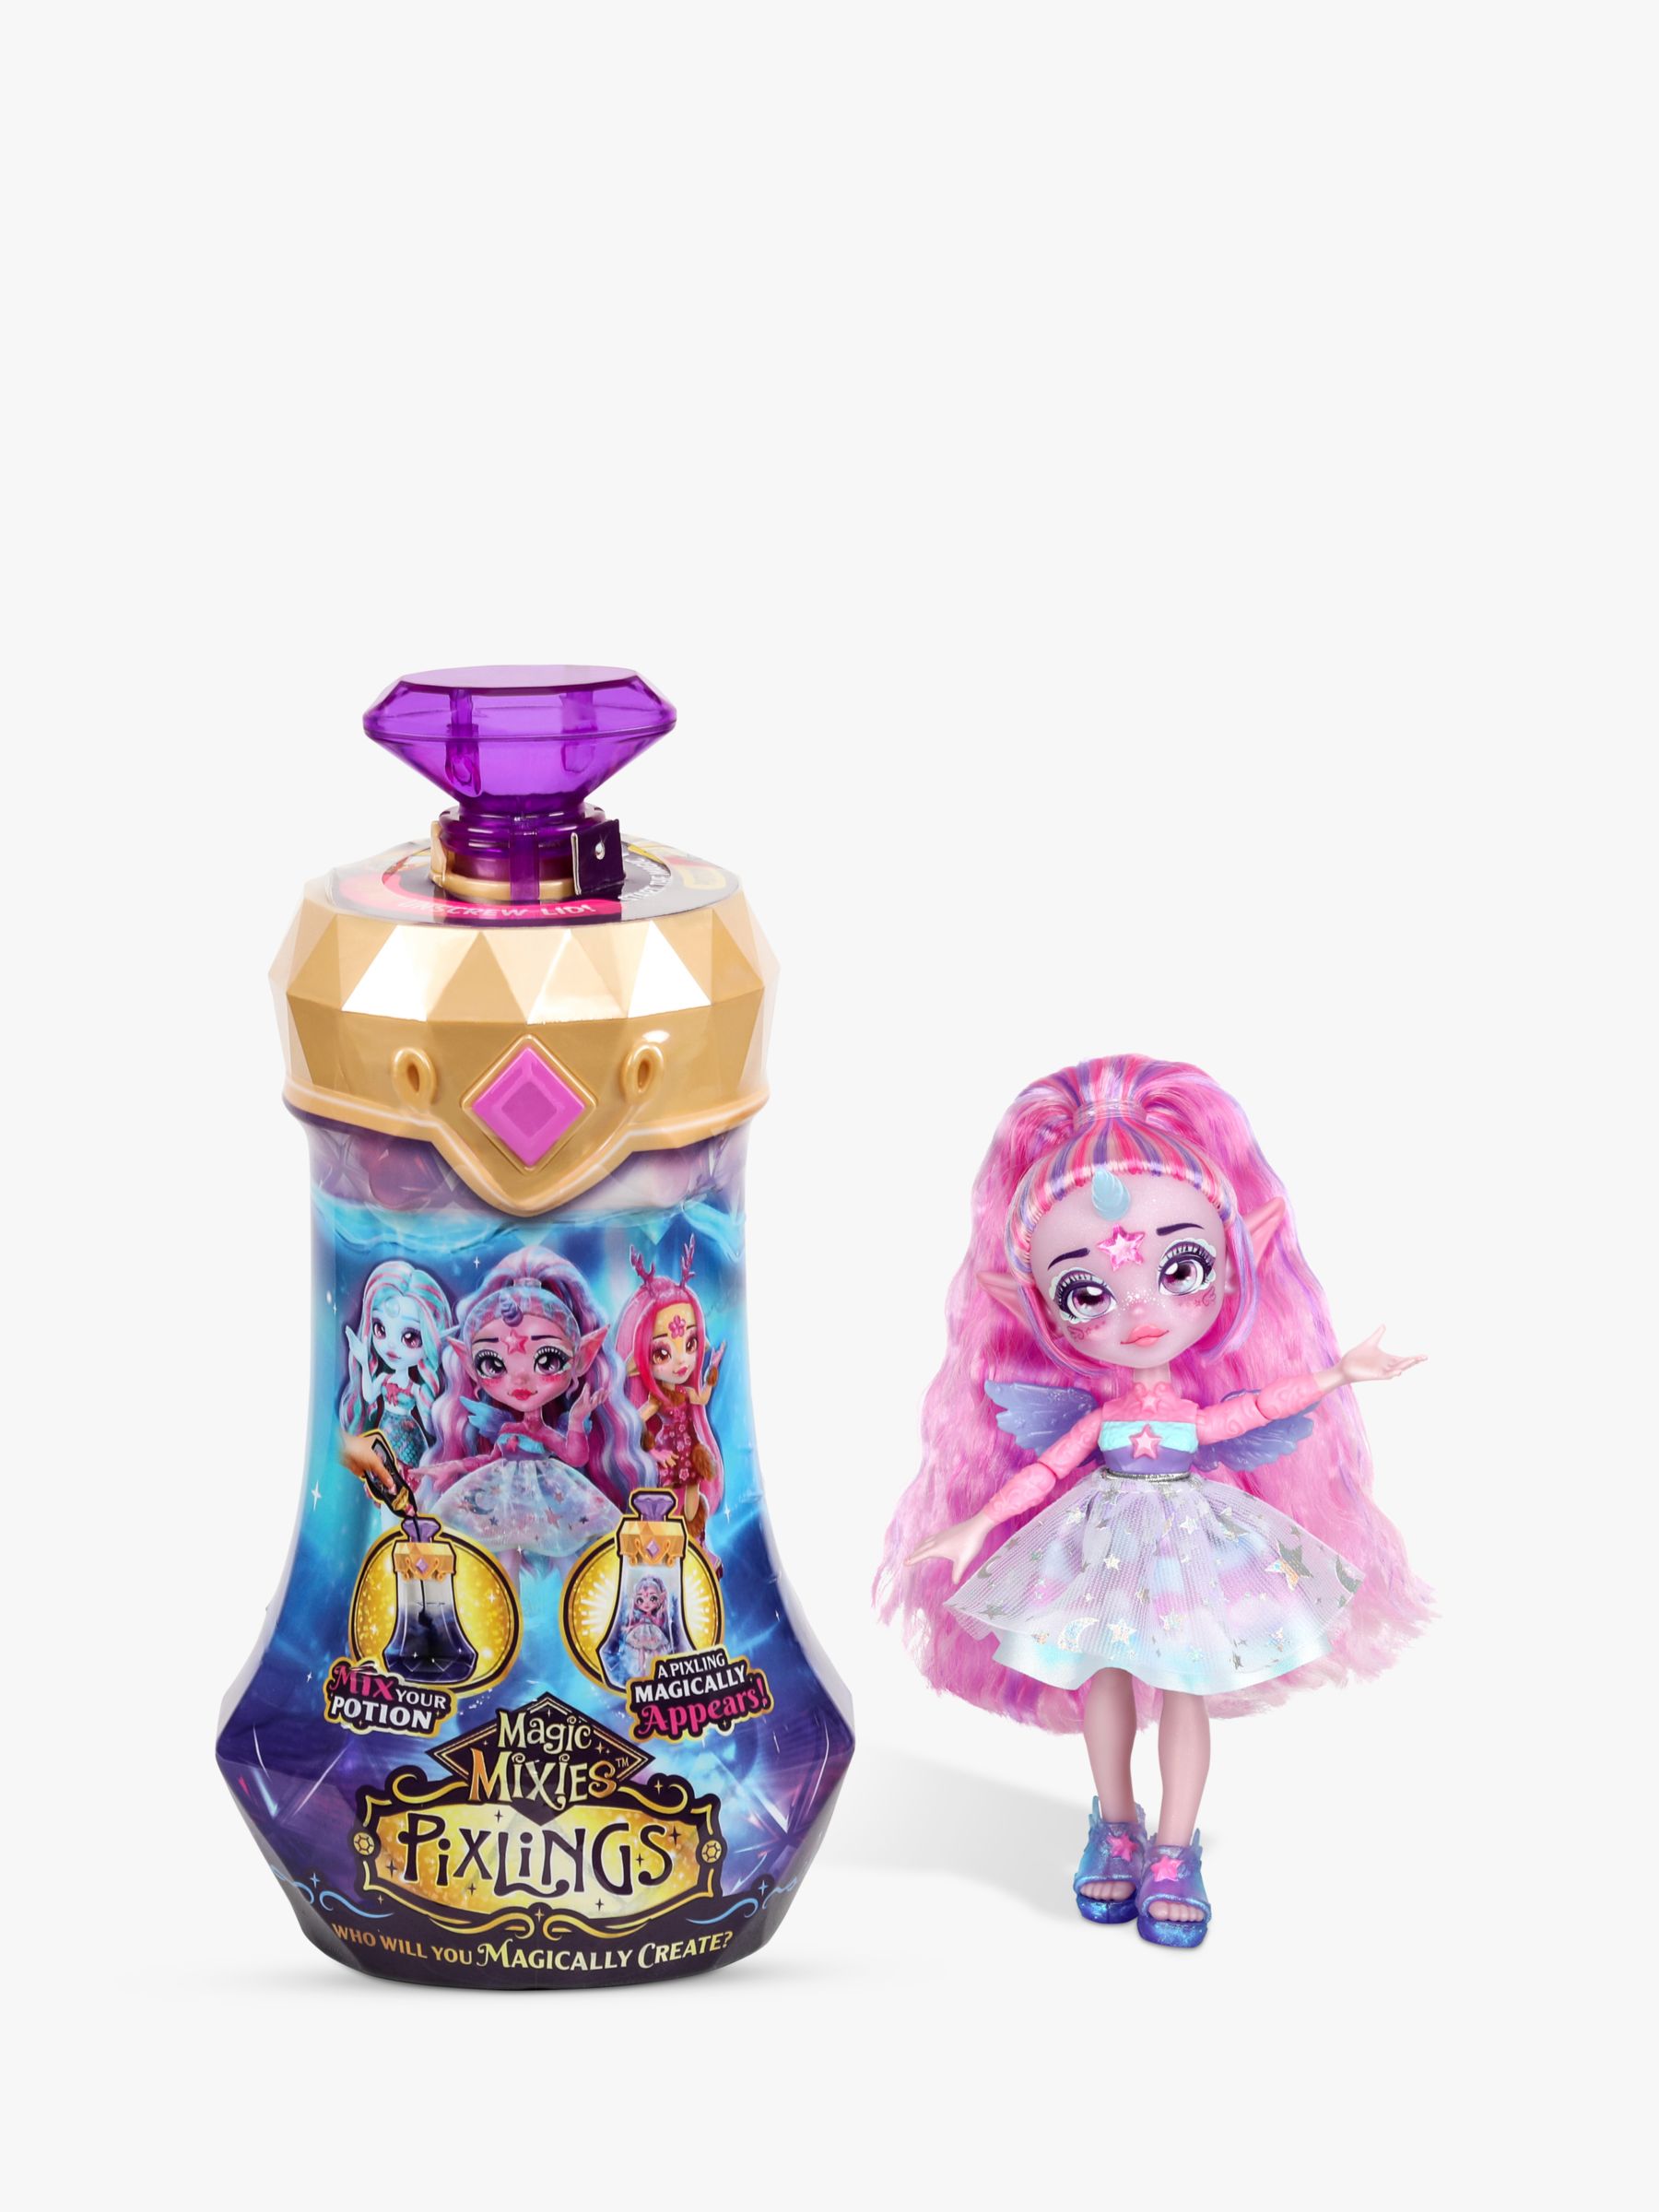 Magic Mixies Pixlings Dolls by Moose Toys : r/Dolls